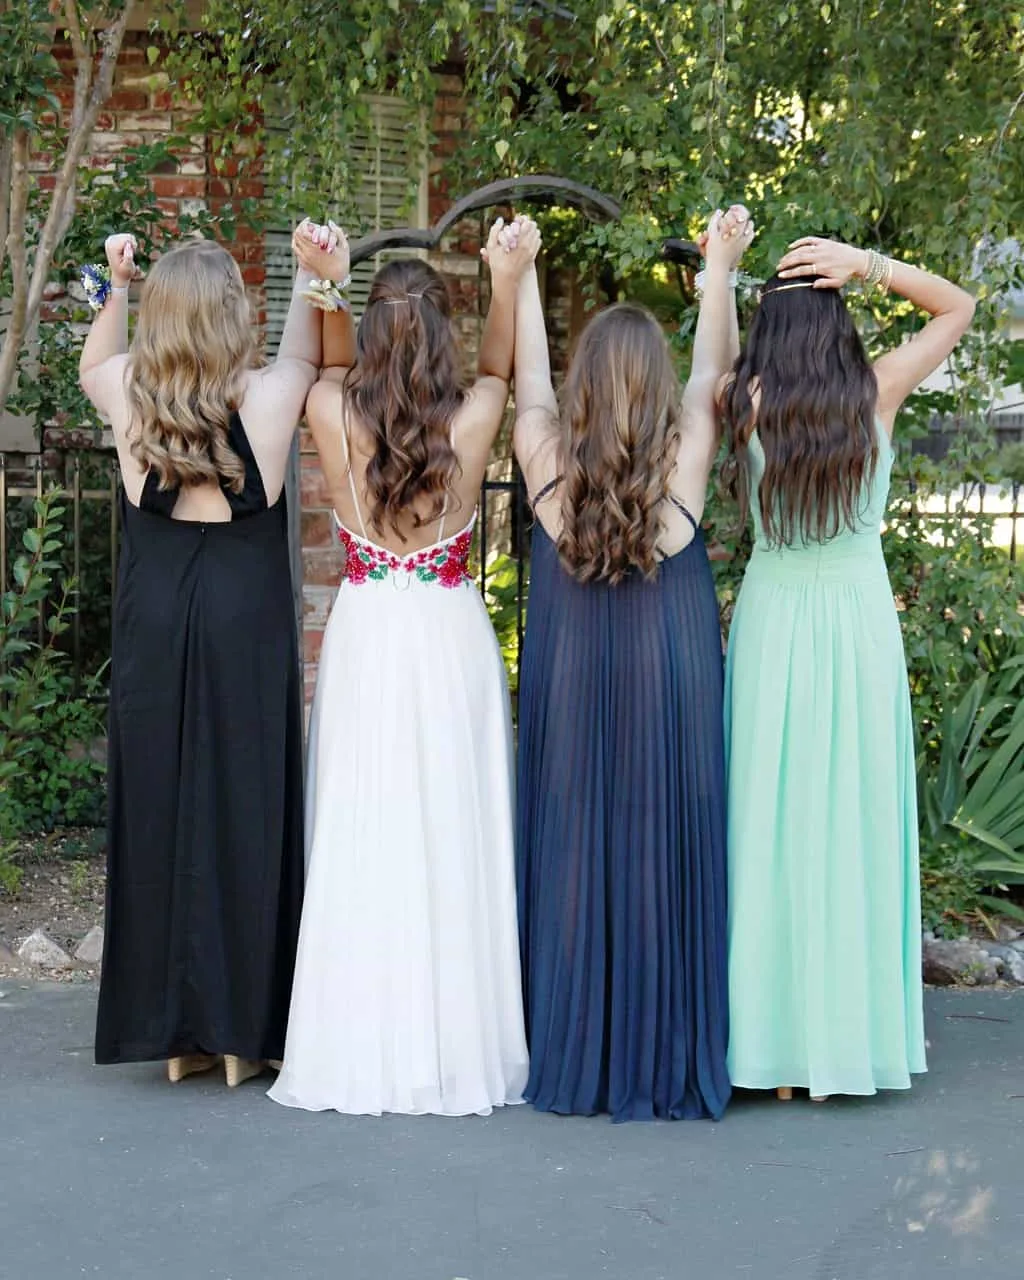 4 girls in prom gowns facing away from camera holding hands